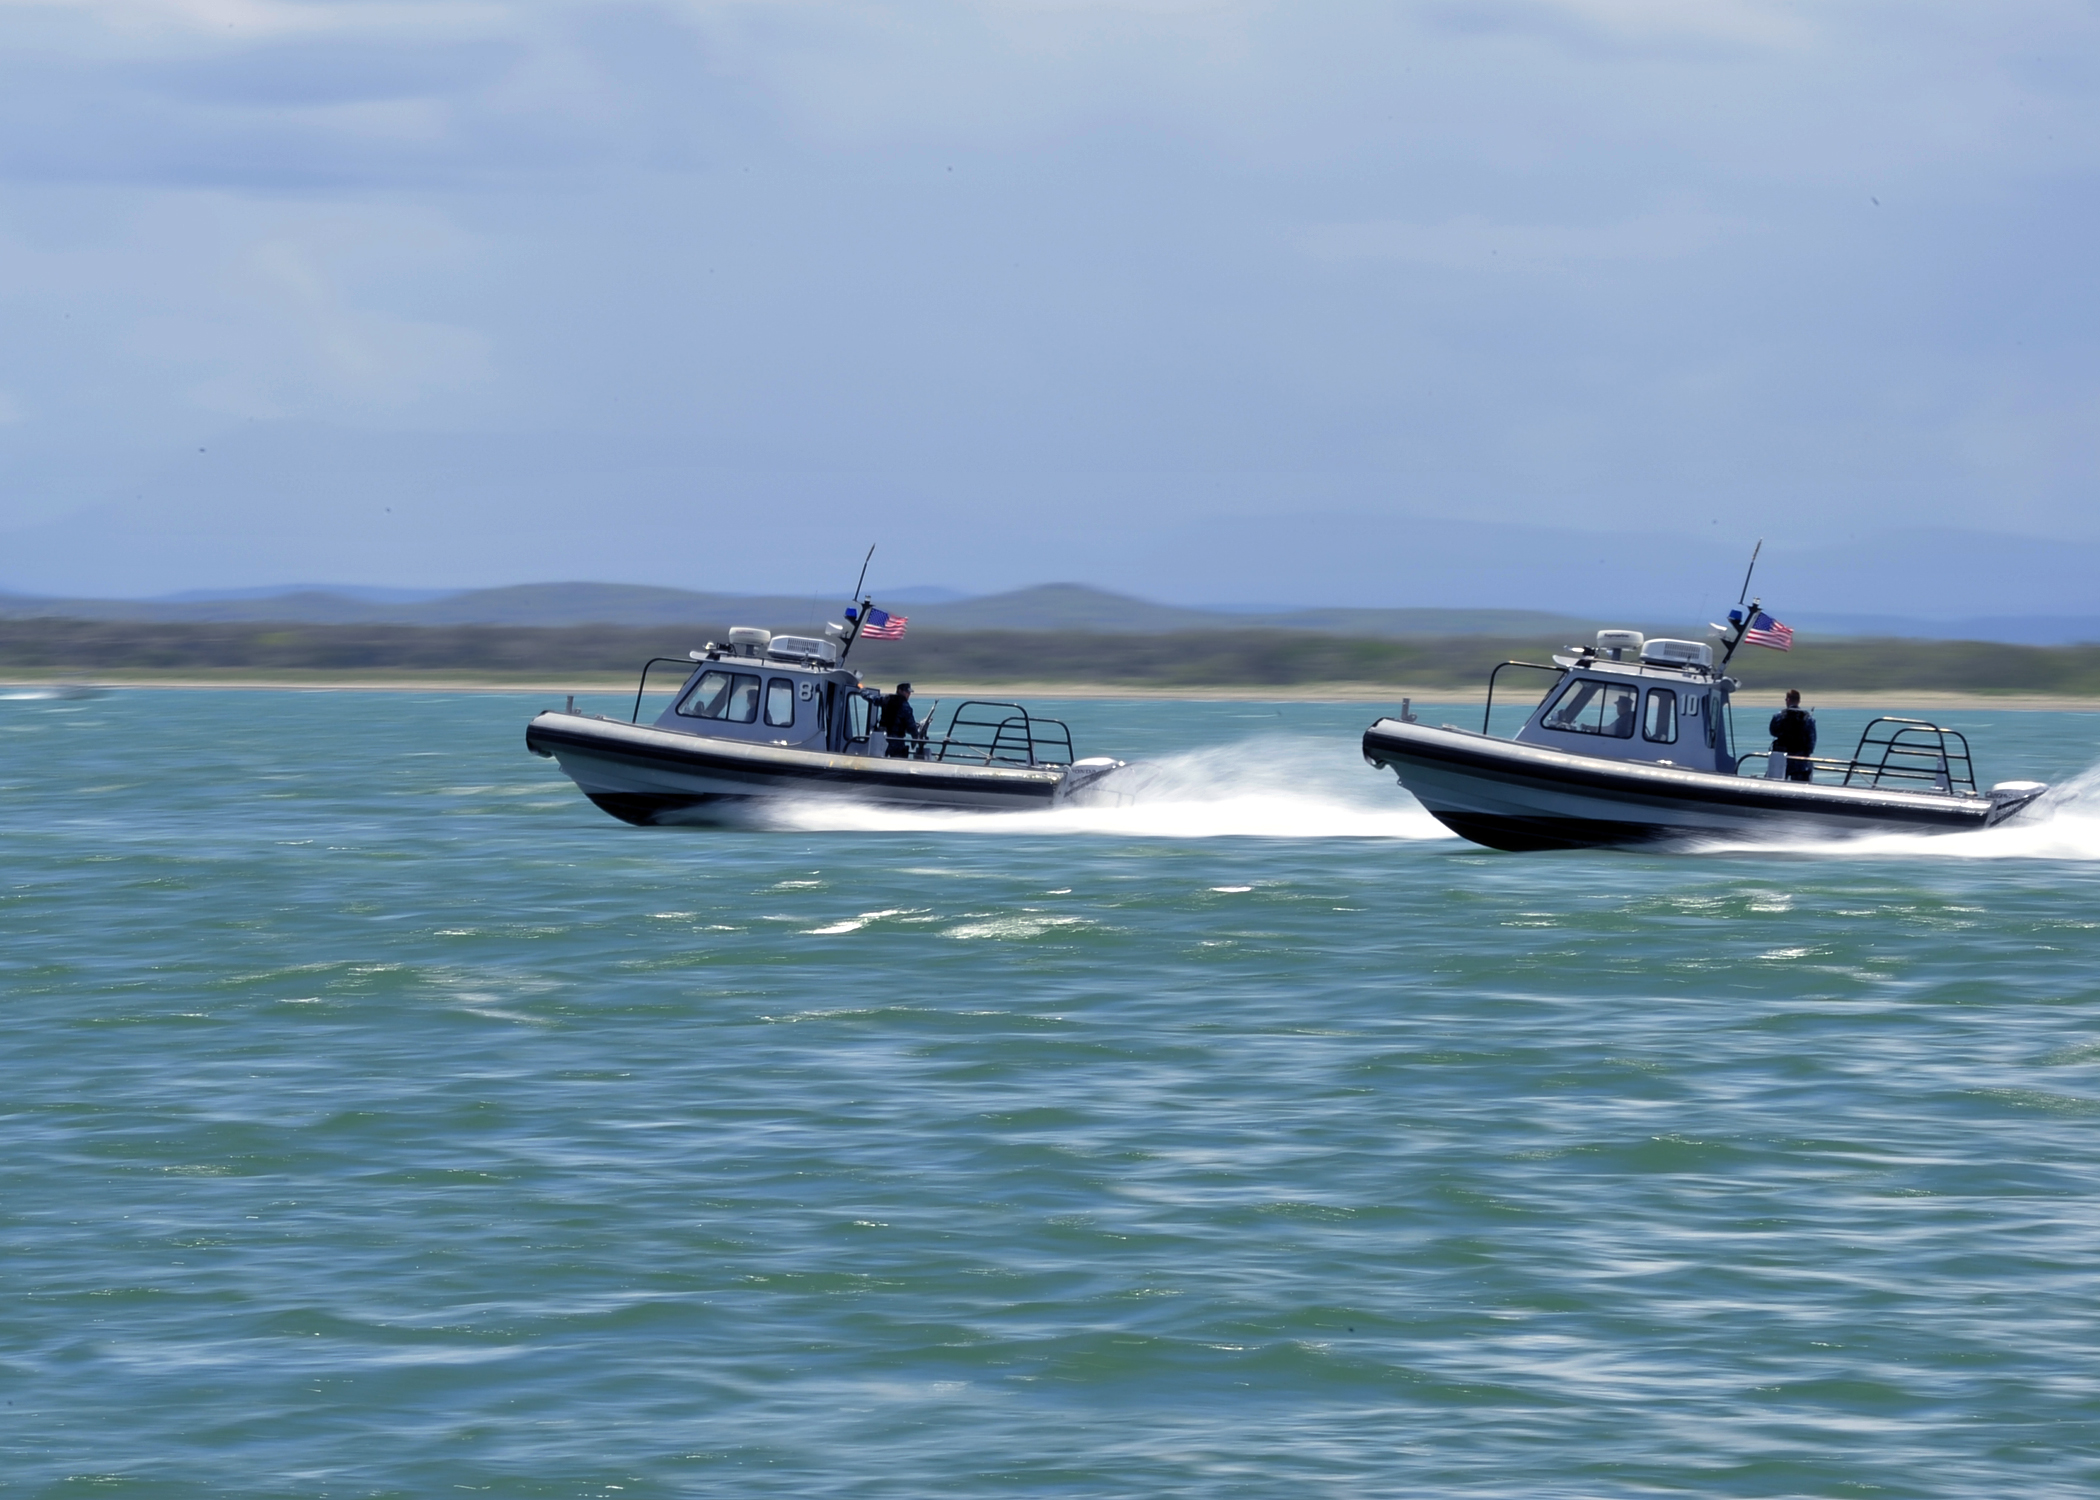 Sailors assigned to the harbor security team at Naval Station Guantanamo Bay, patrol the waters of the base